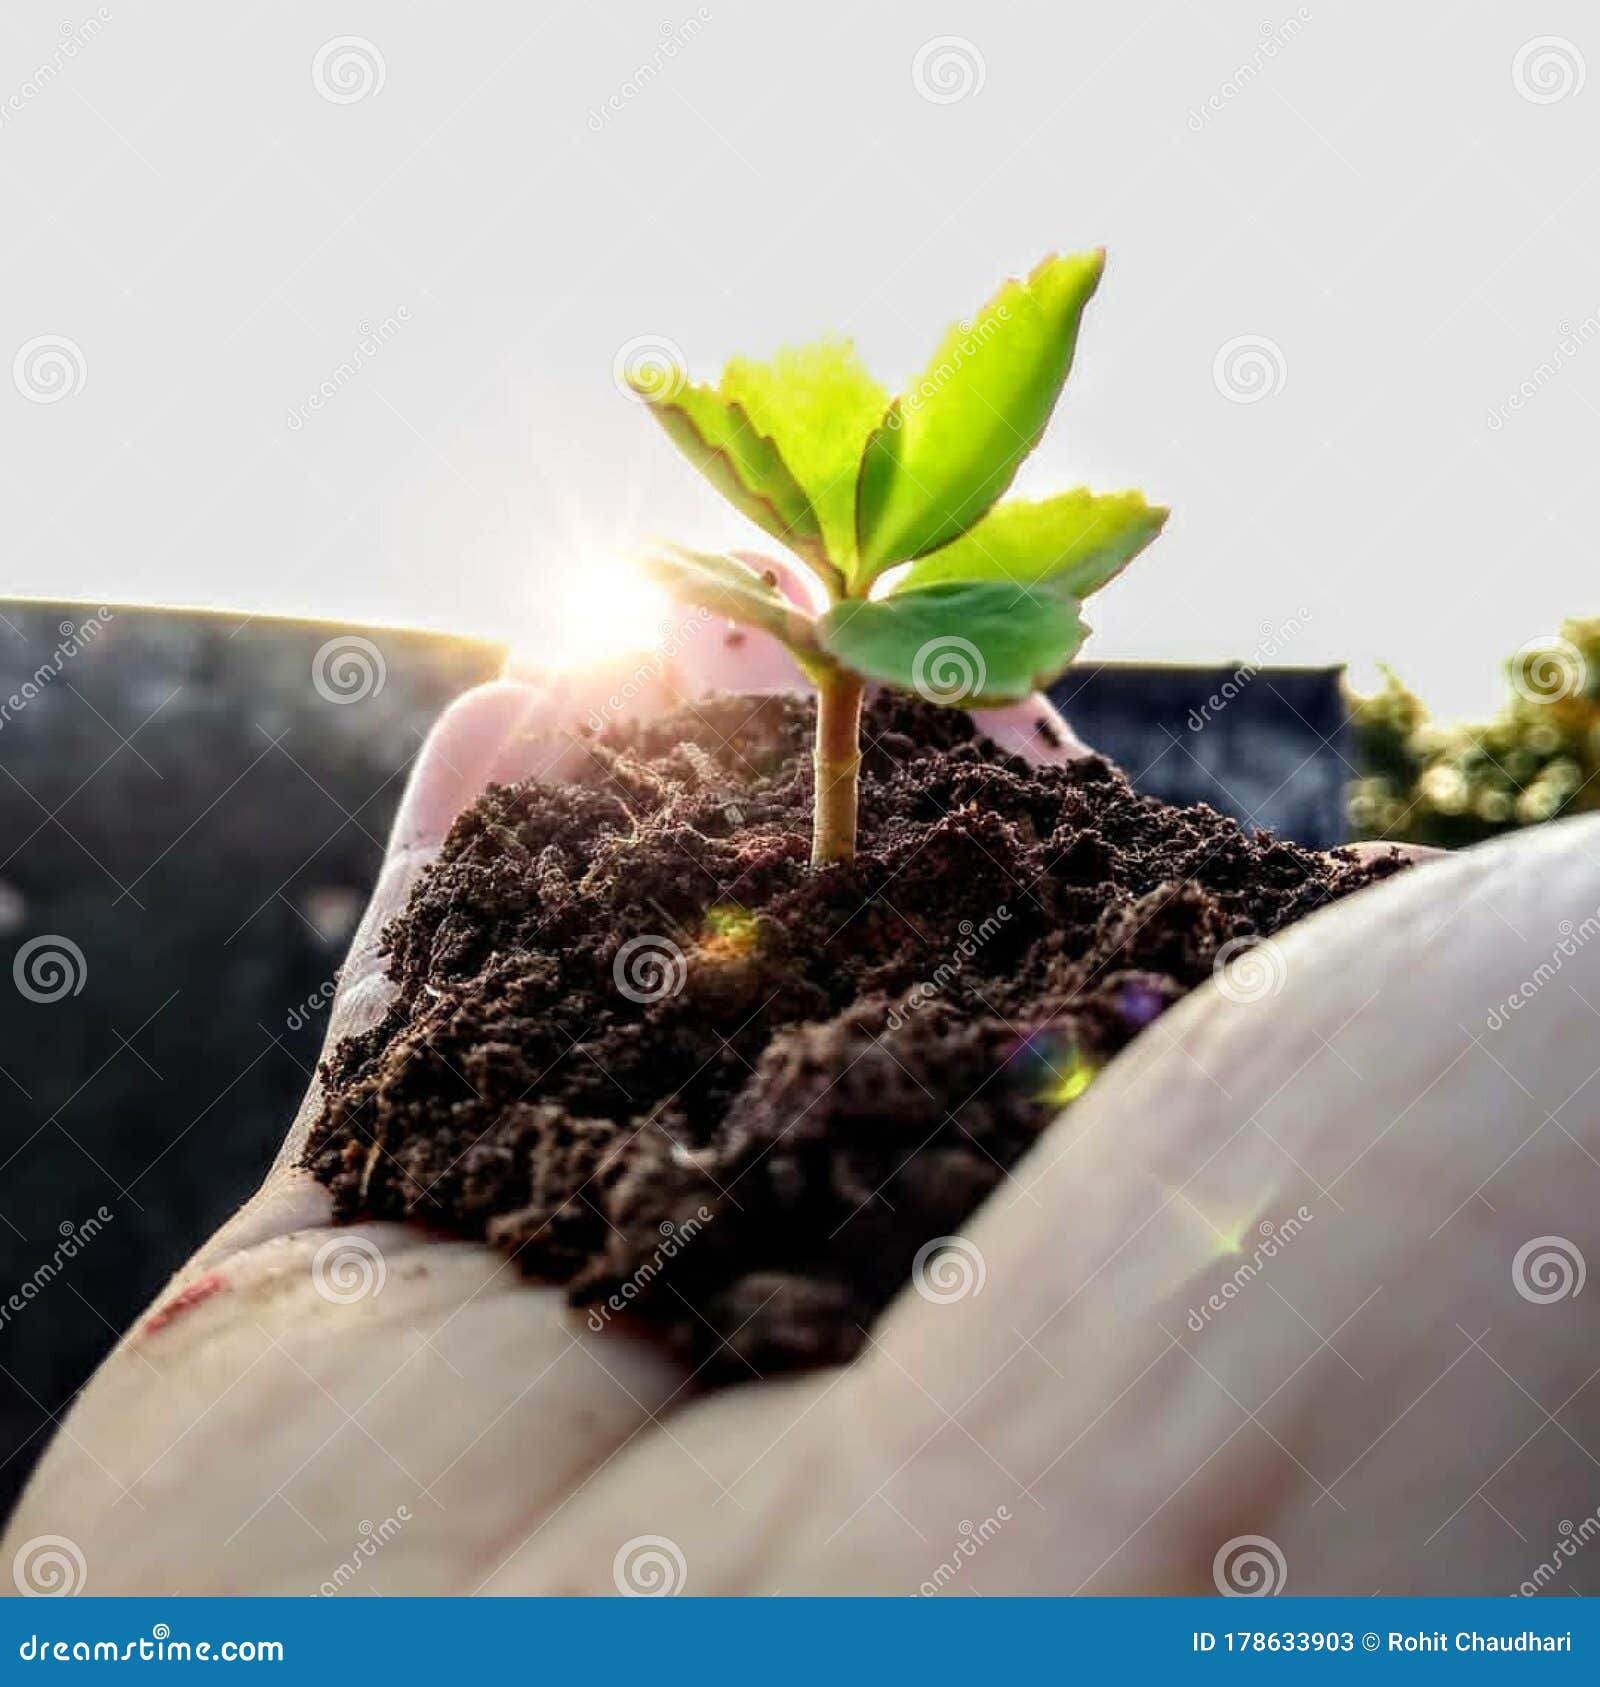 creative pic in which small plant is in hand